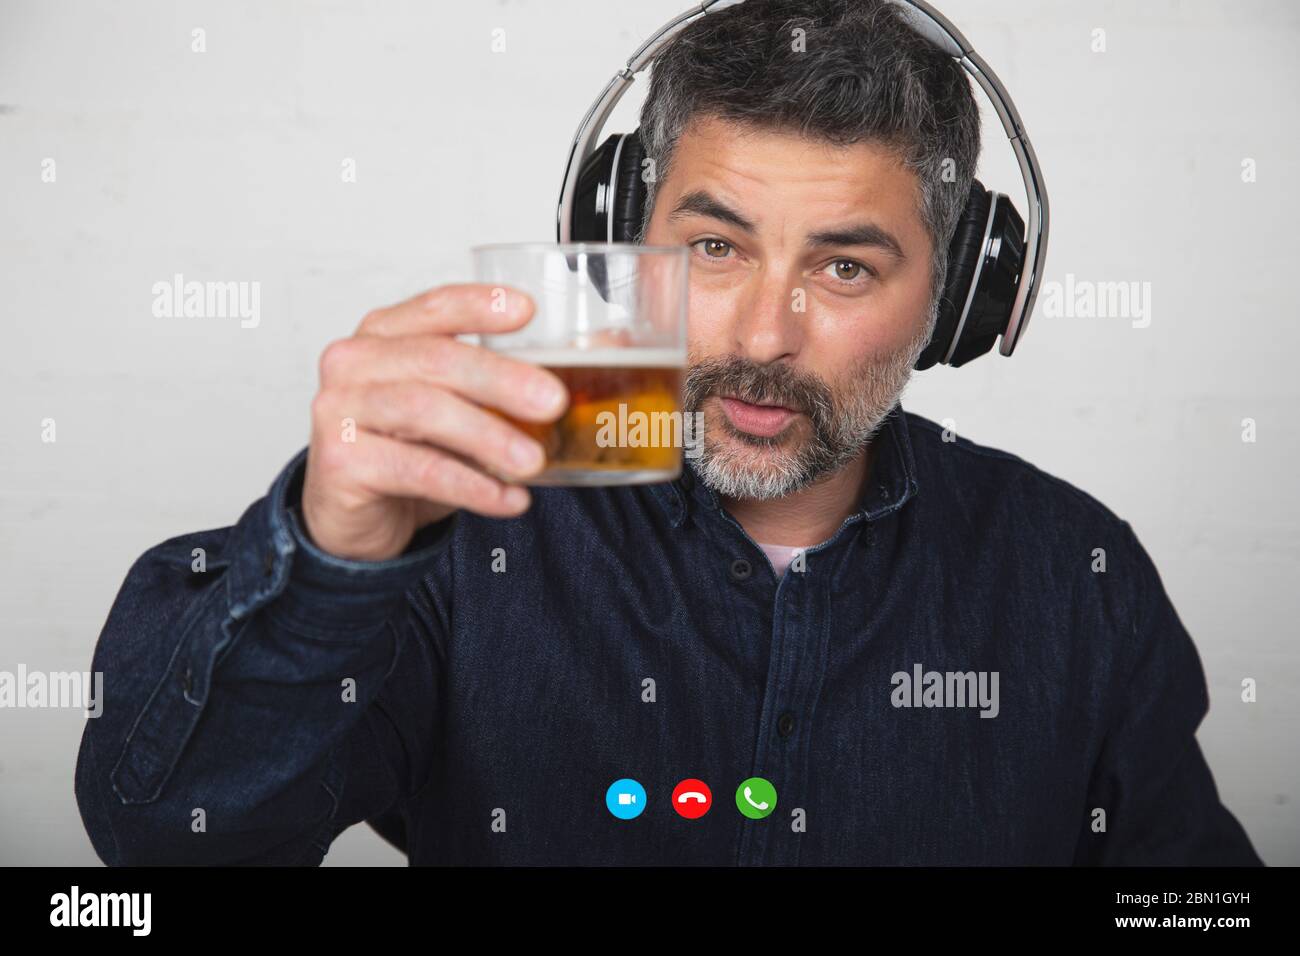 Man Chatting On A Video Call Person Sharing A Glass Of Beer On A Tech Platform During Quarantine Isolation Stock Photo Alamy